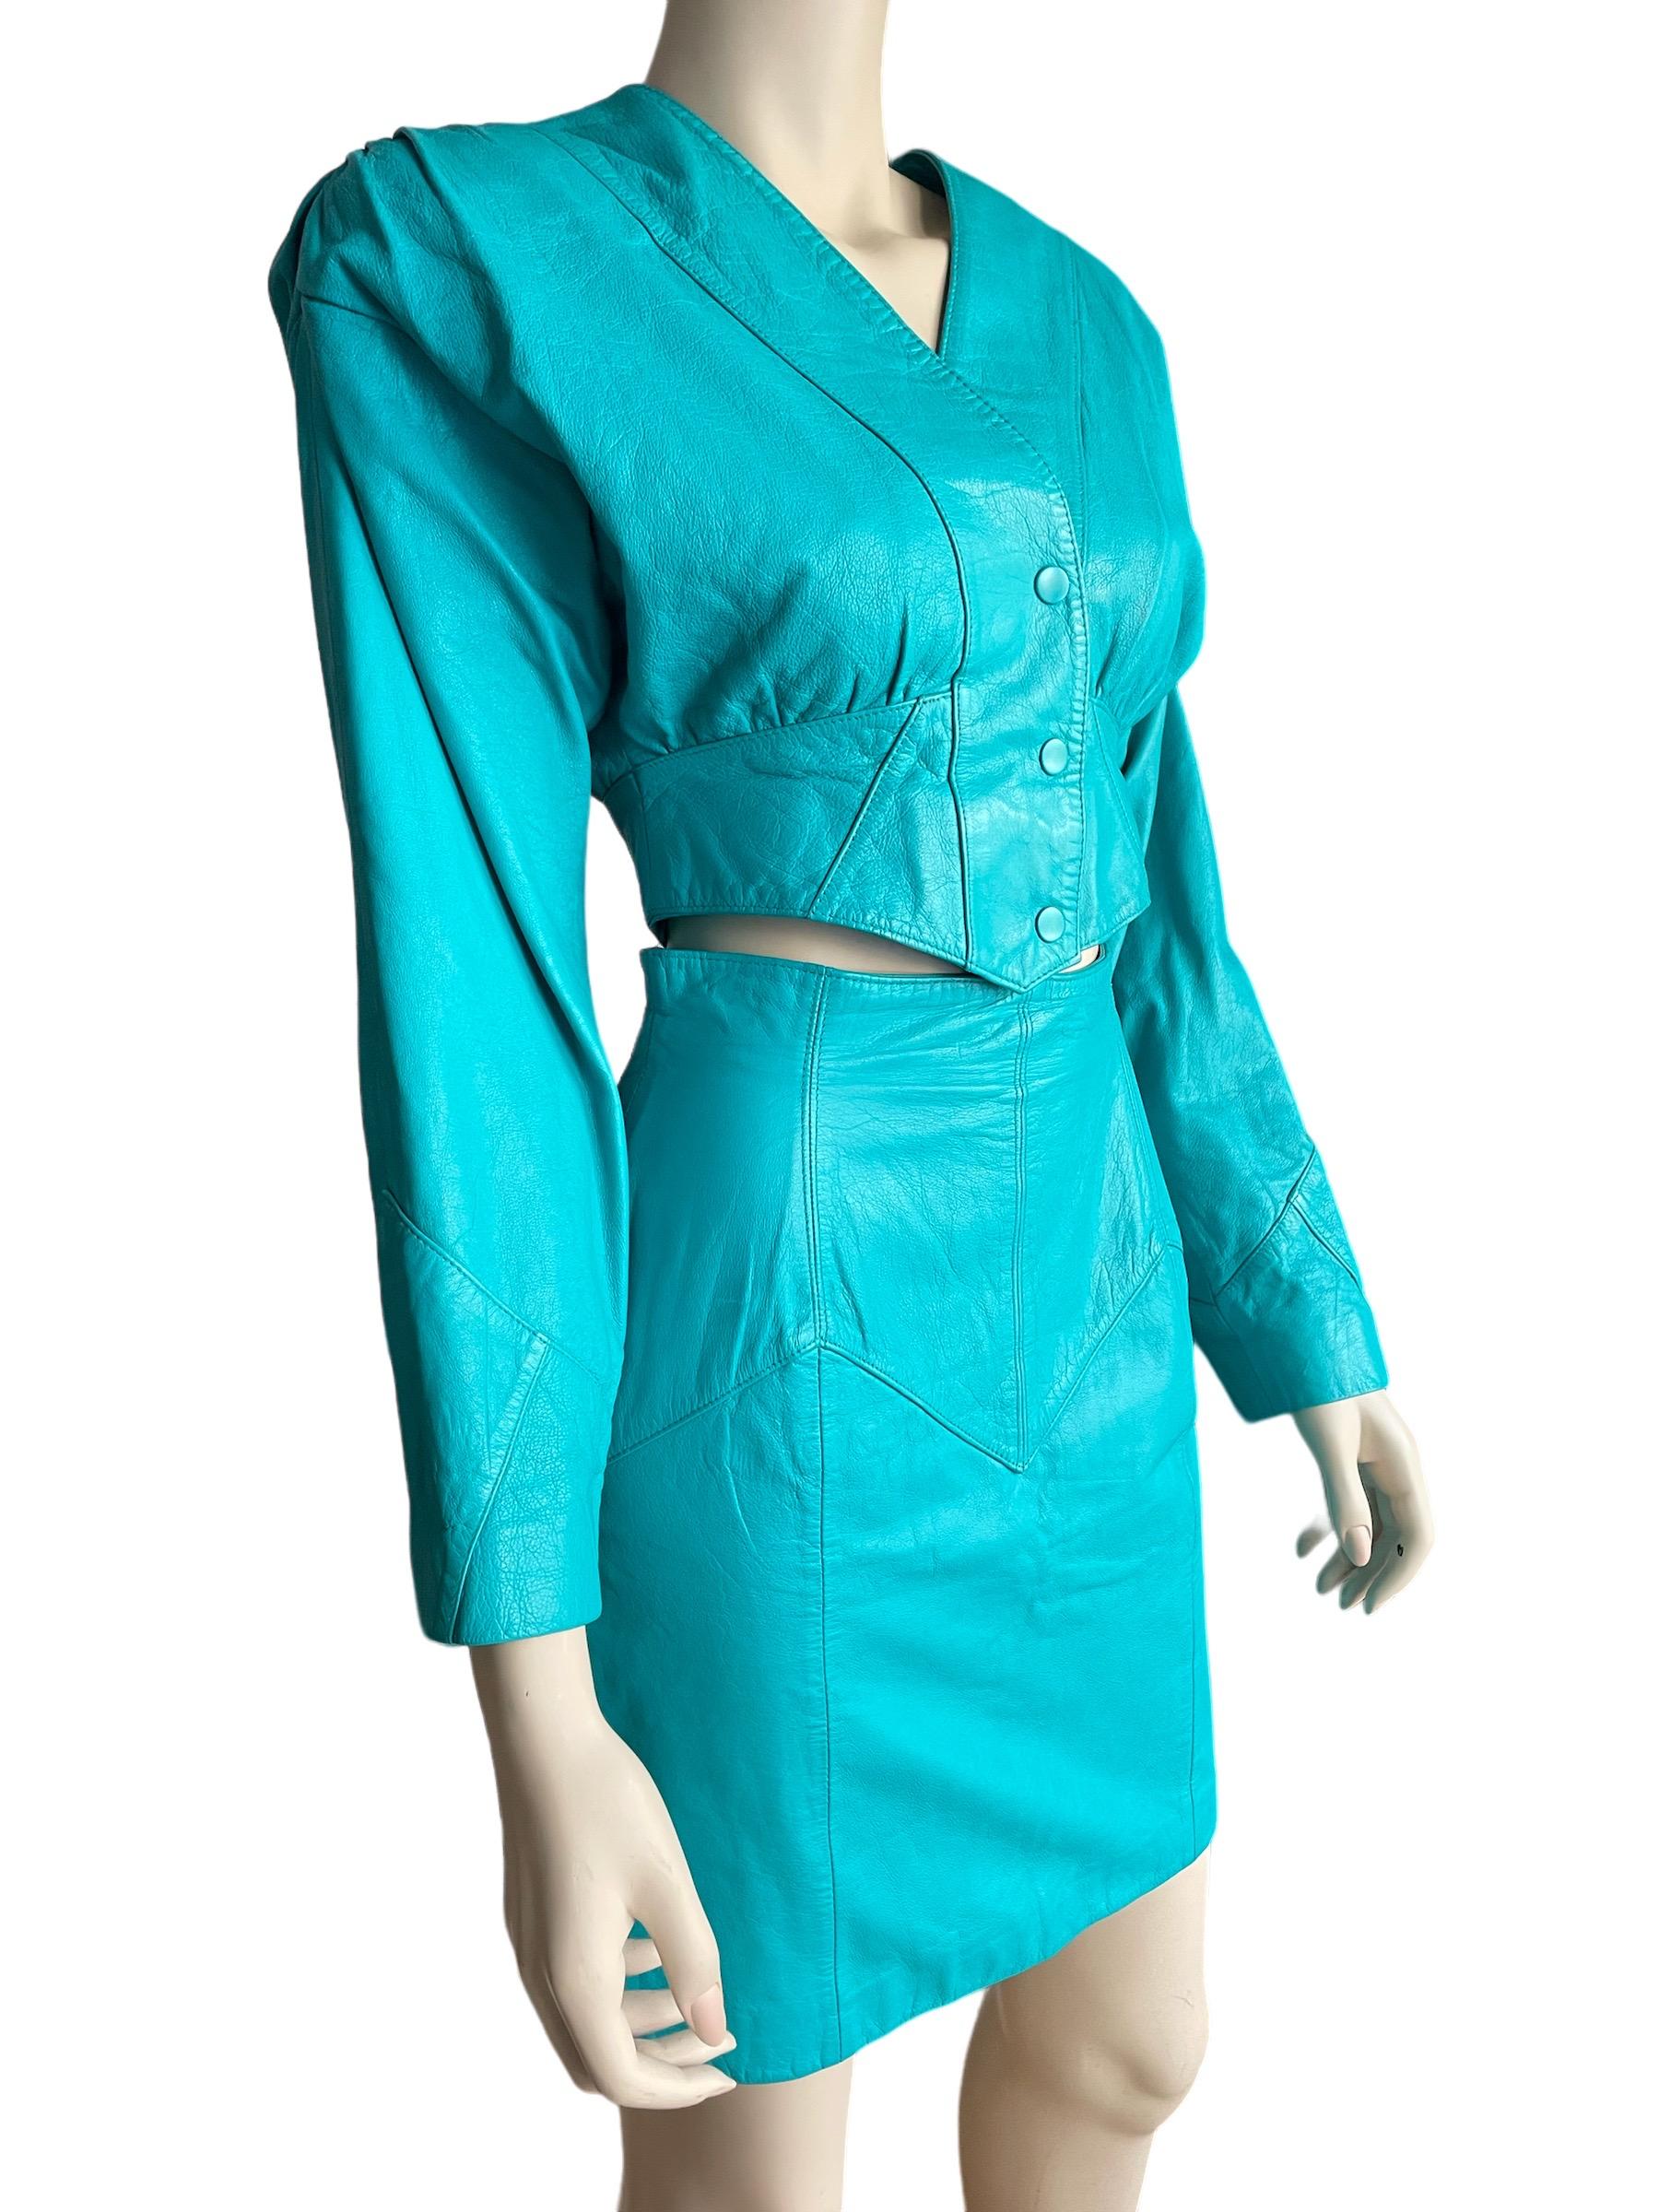 1980s Teal Leather Cropped Jacket and Skirt Set 

An amazing brightly colored teal leather high waisted mini skirt and cropped snap button jacket. A classic 80s look, shoulder pads included. 

Length of skirt: (high wasited) 18.5